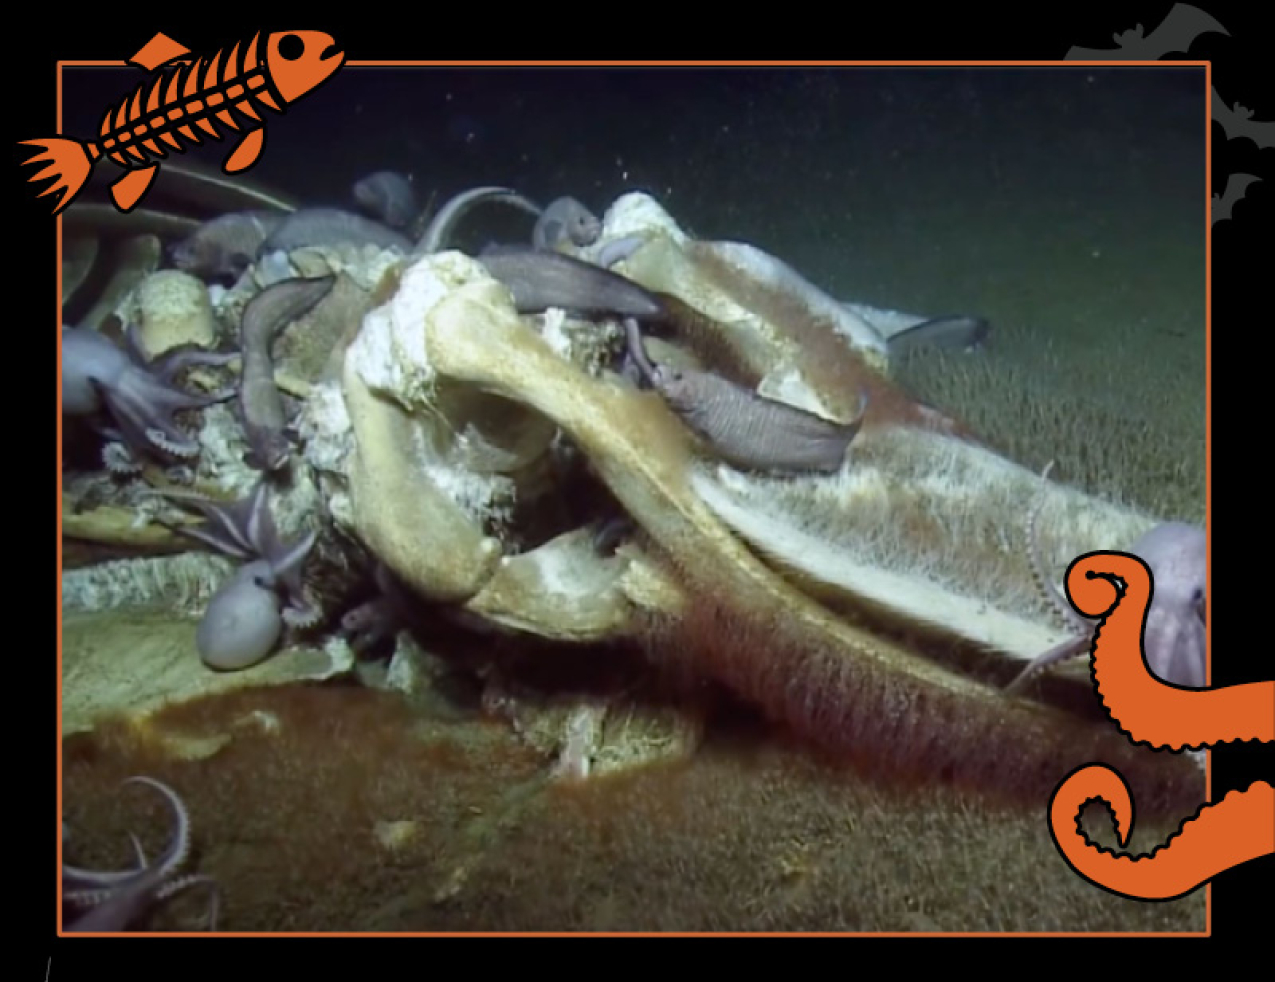 A screenshot of a video with a still image of a whale carcass on the bottom of the ocean. Border of the photo is black with orange sea creature graphics of octopus tentacles and a fish skeleton. Text: Deep dive greatest hits, #NOAASpookyScience with NOAA logo.